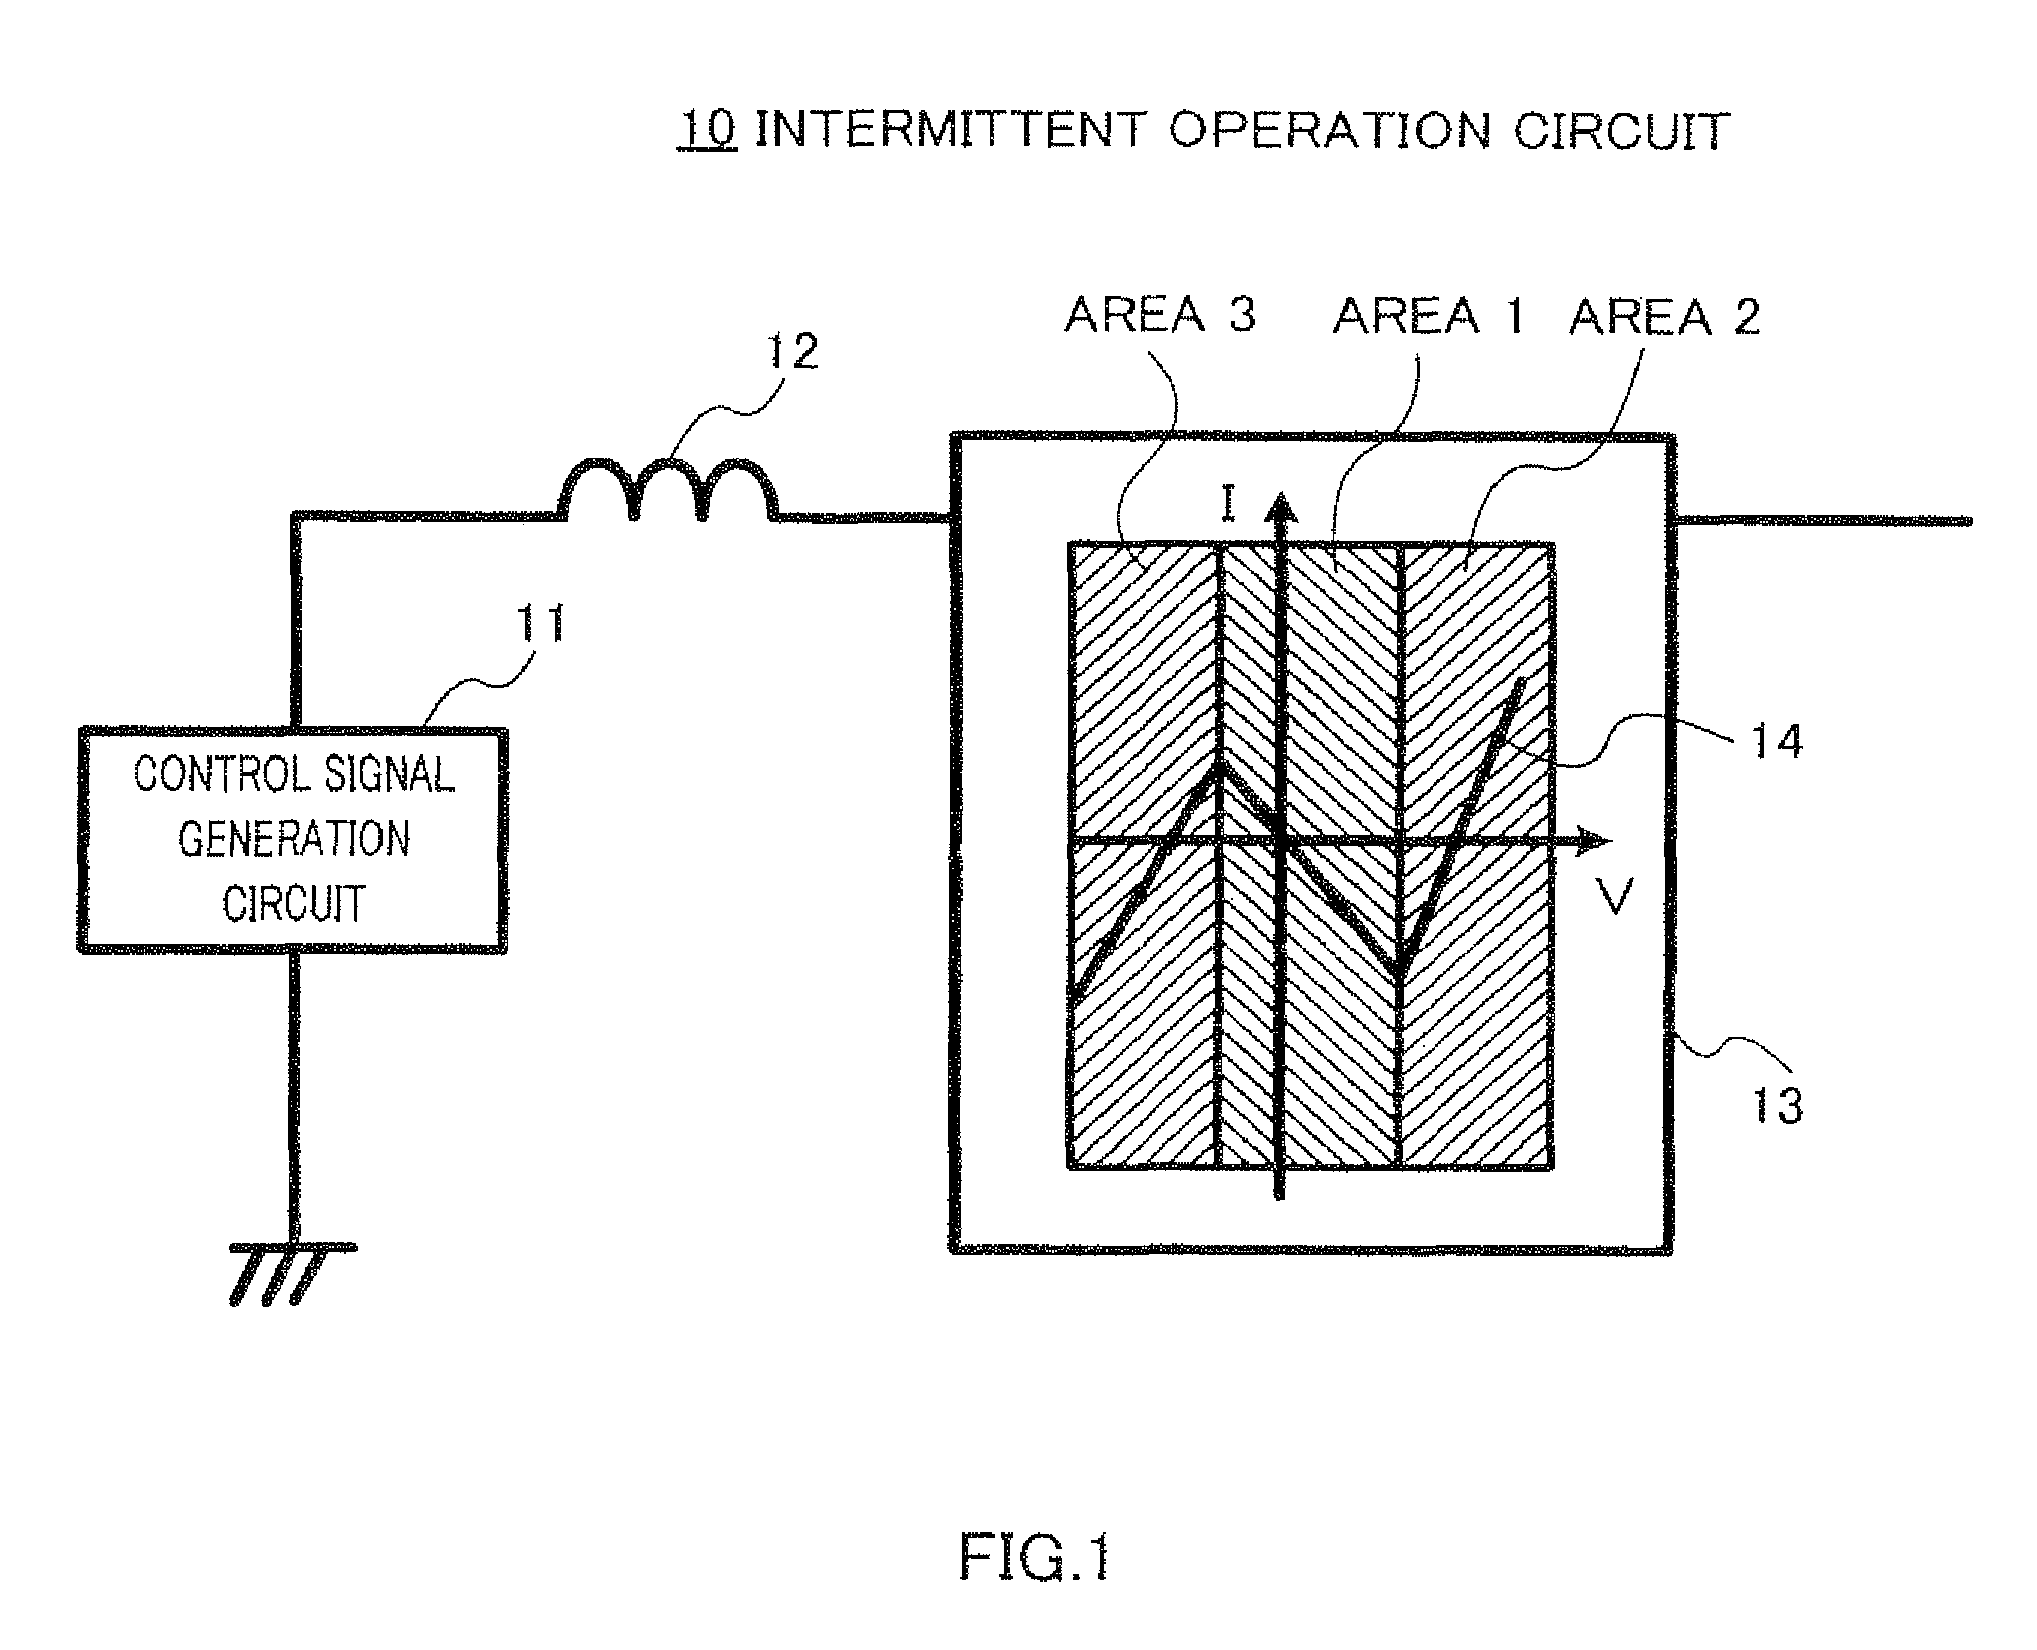 Intermittent operation circuit and modulation device